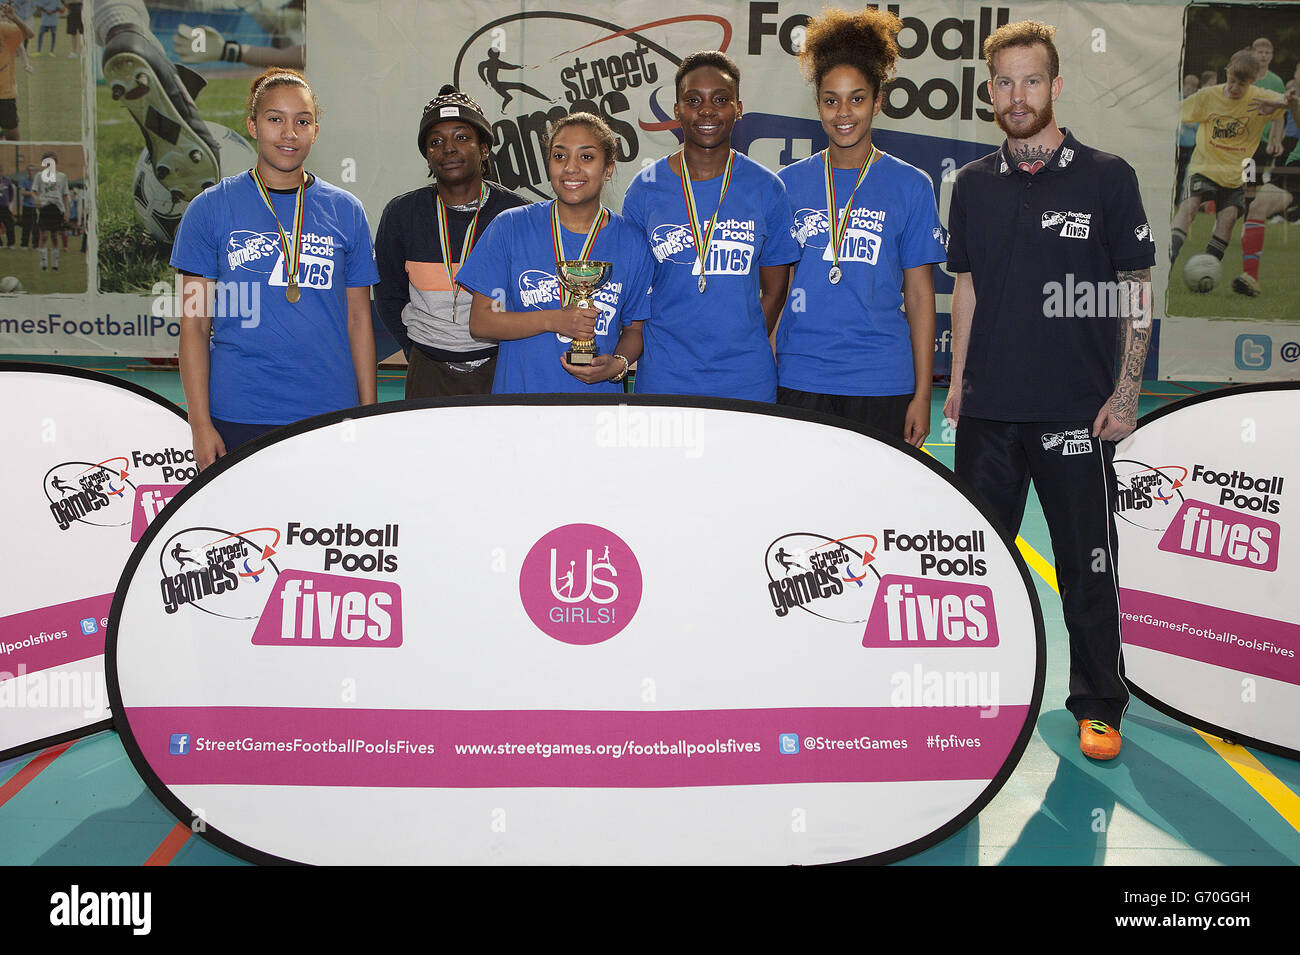 Soccer - StreetGames Football Pools Fives - Trafford Park. The winning team pose for a photograph with the trophy during the StreetGames Football Pools Fives Stock Photo